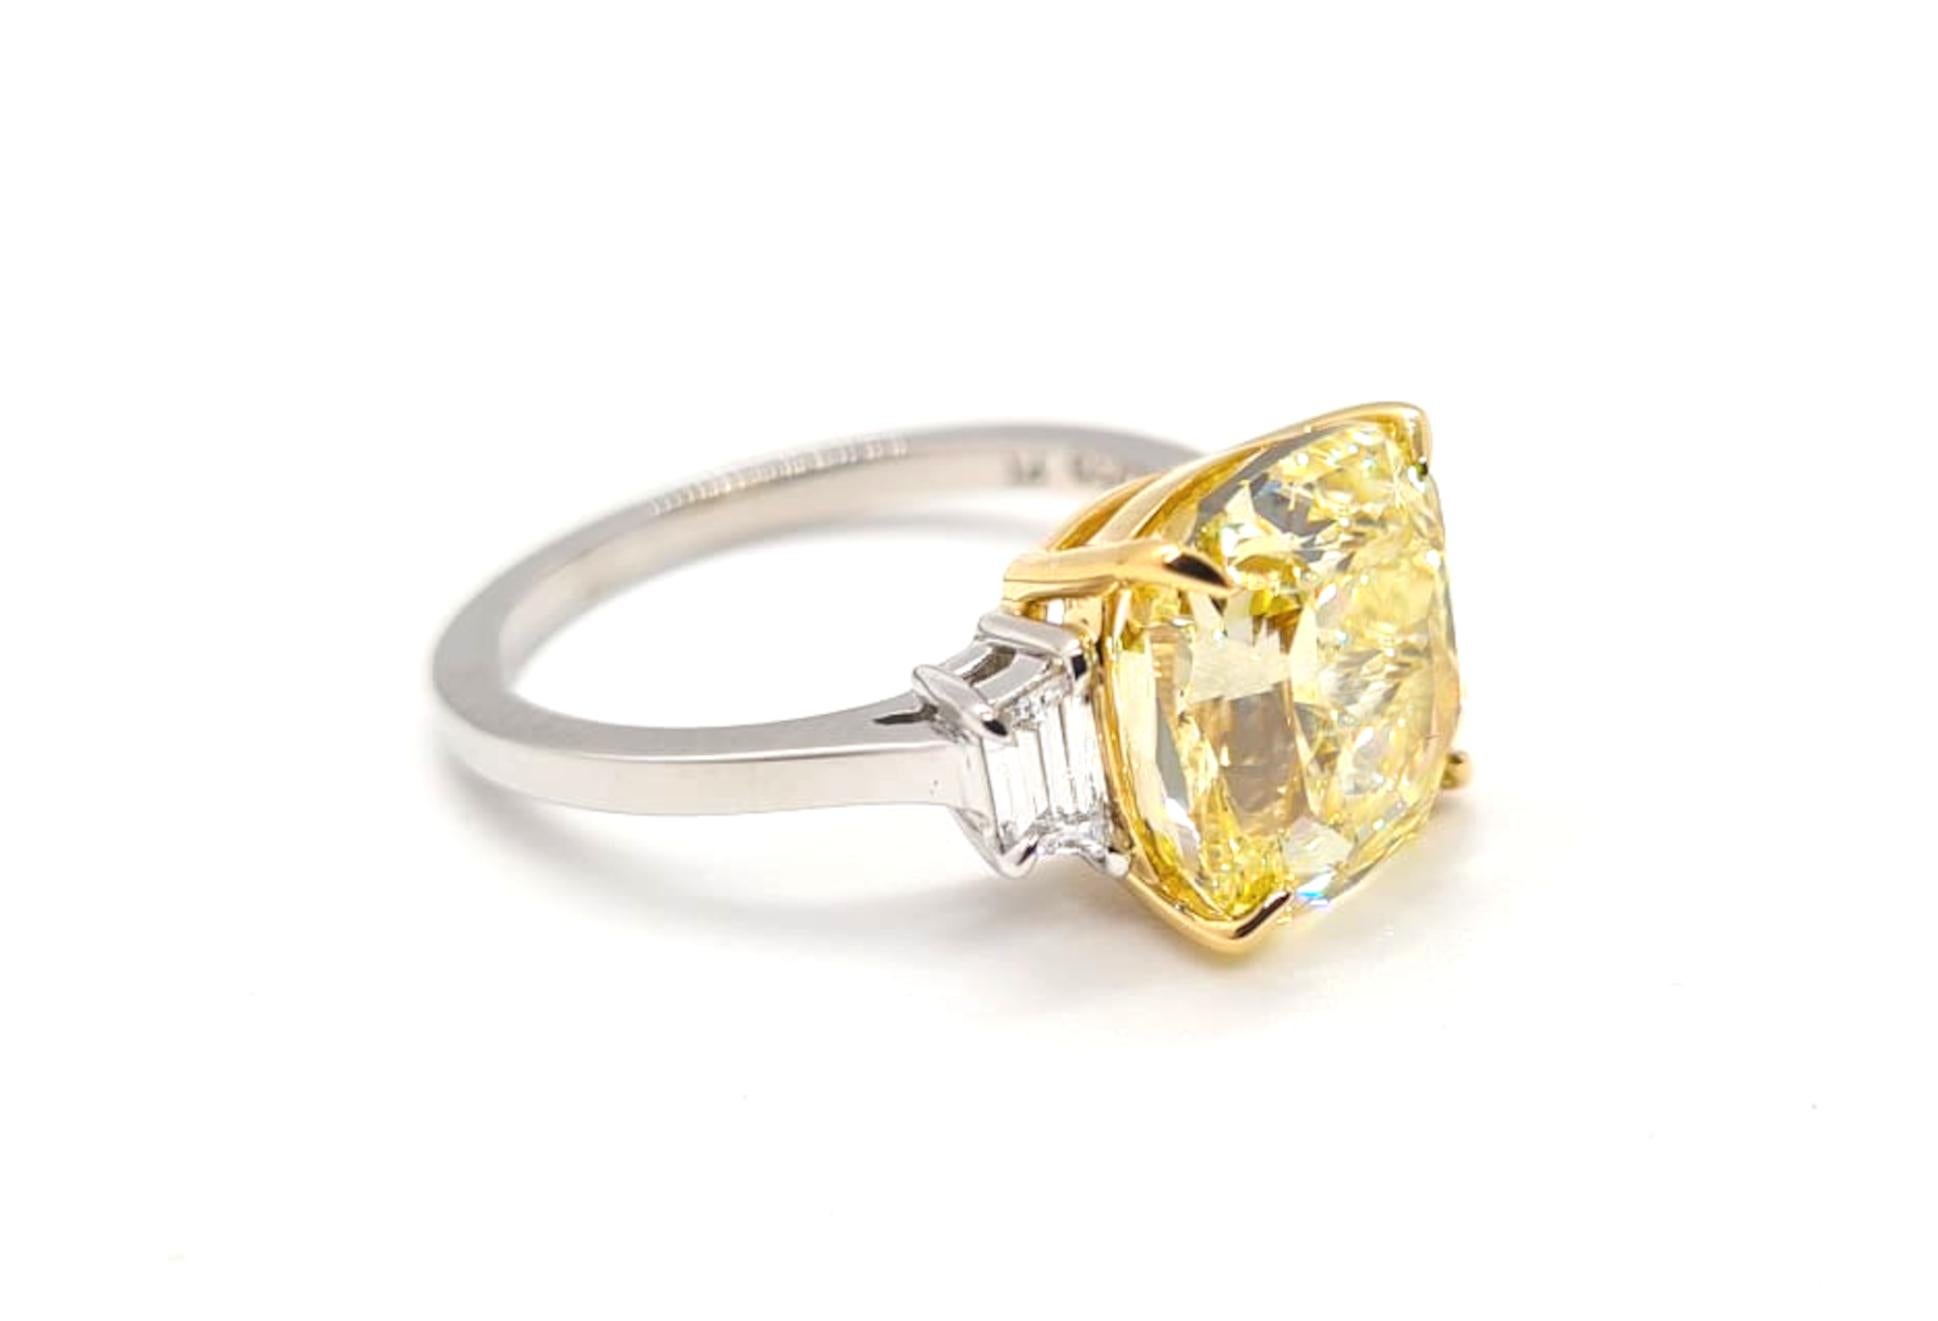 Contemporary GIA Certified 6.12 Carat Cushion VVS2 Fancy Yellow Diamond Platinum Ring For Sale